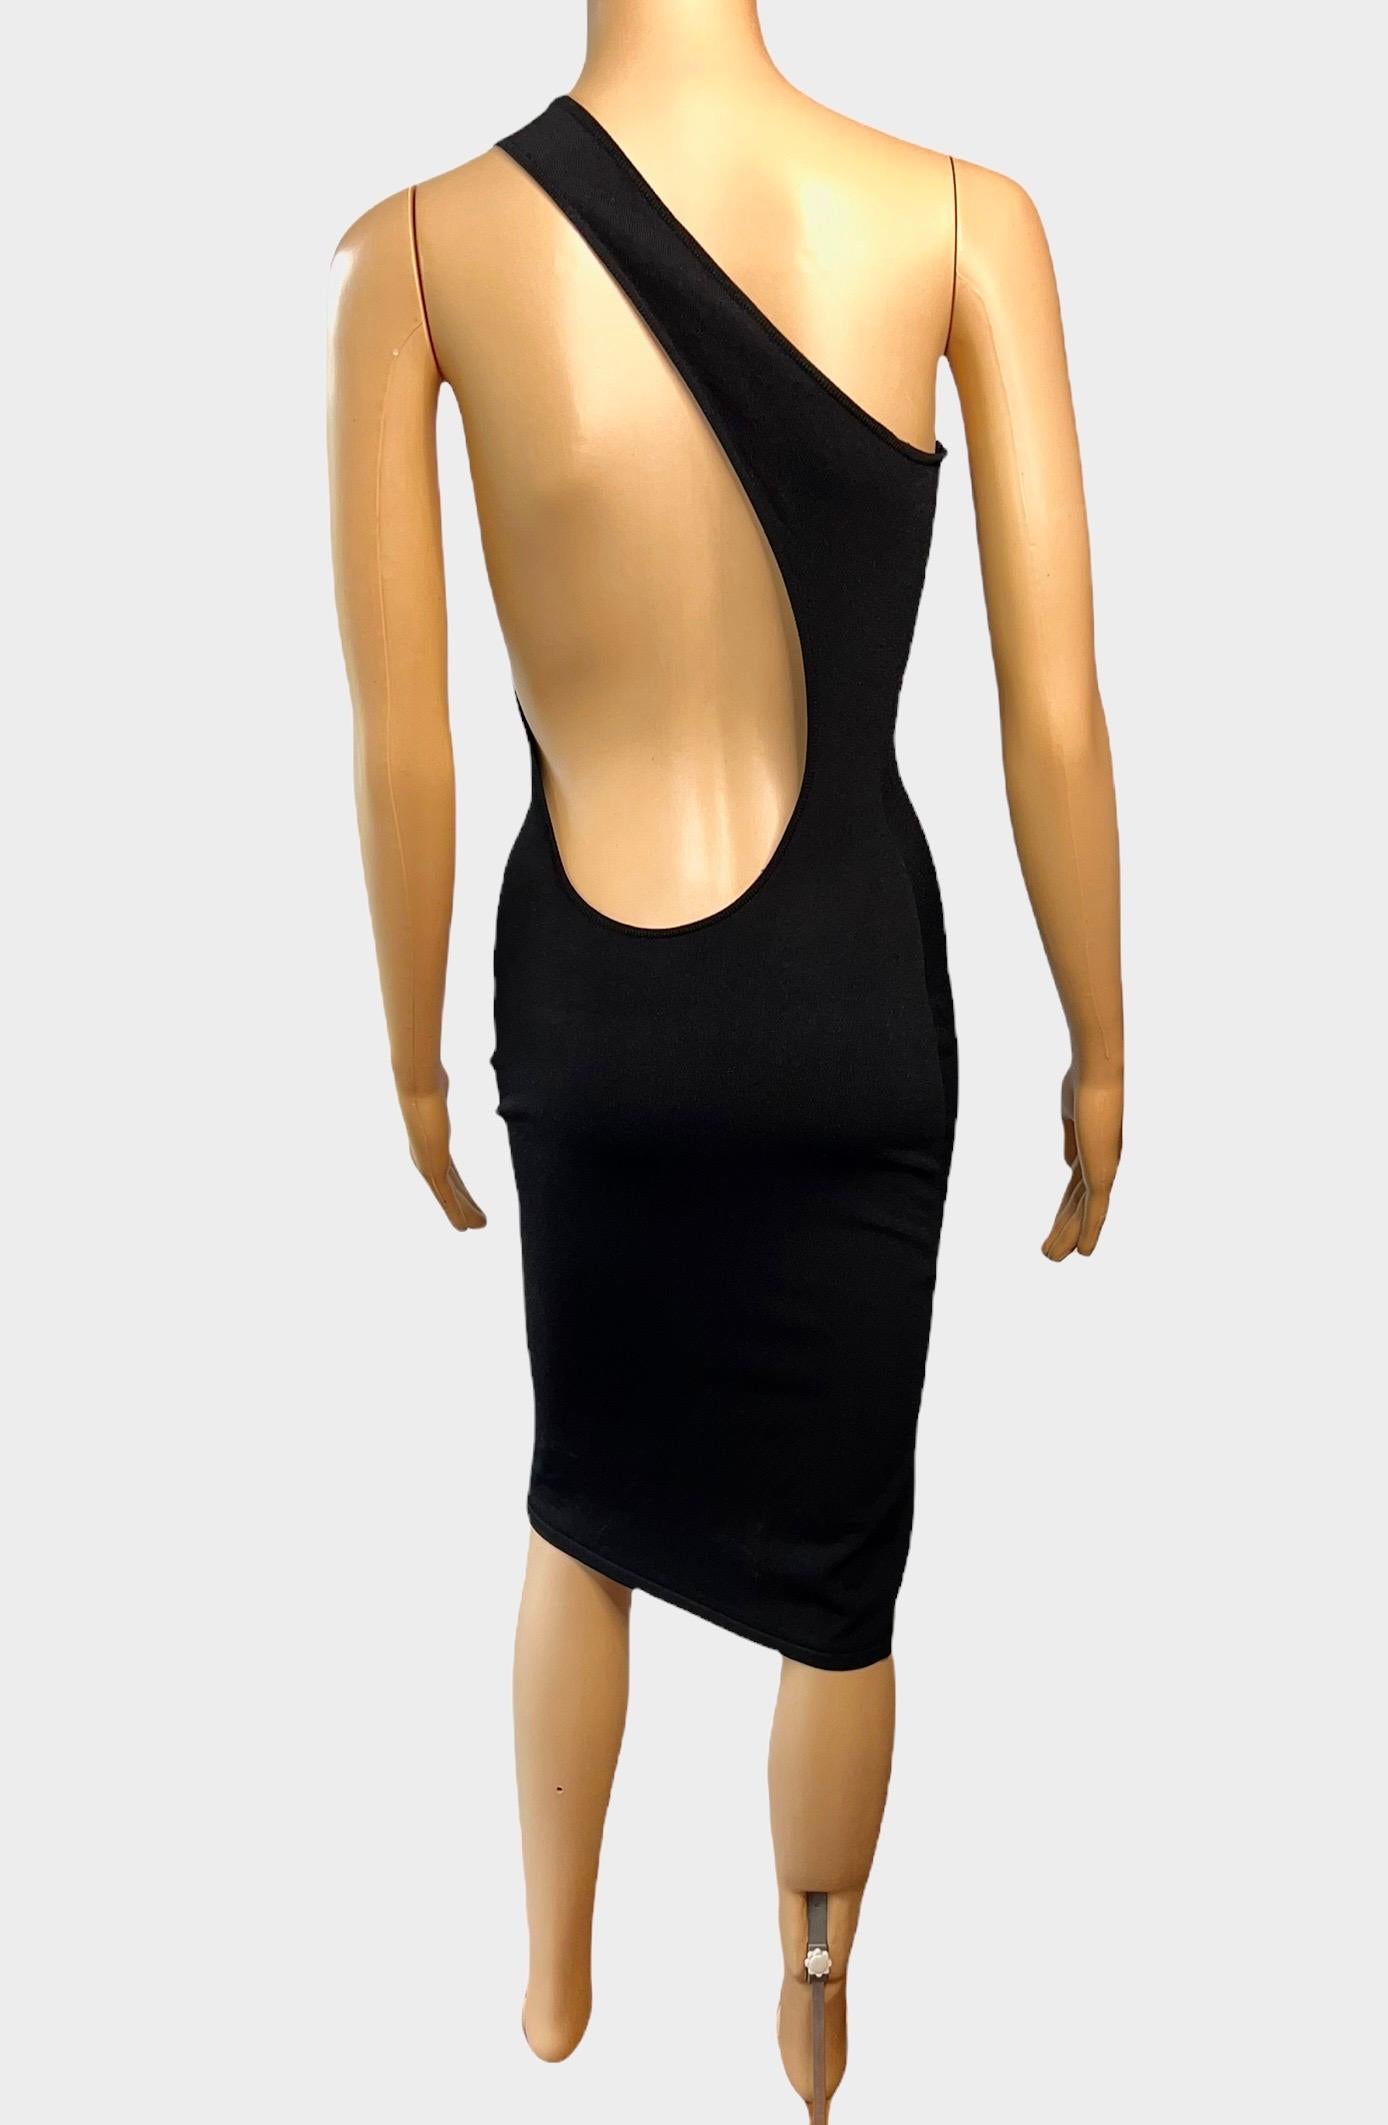 Tom Ford for Gucci S/S 2000 Cutout Bodycon Knit Black Dress For Sale 4